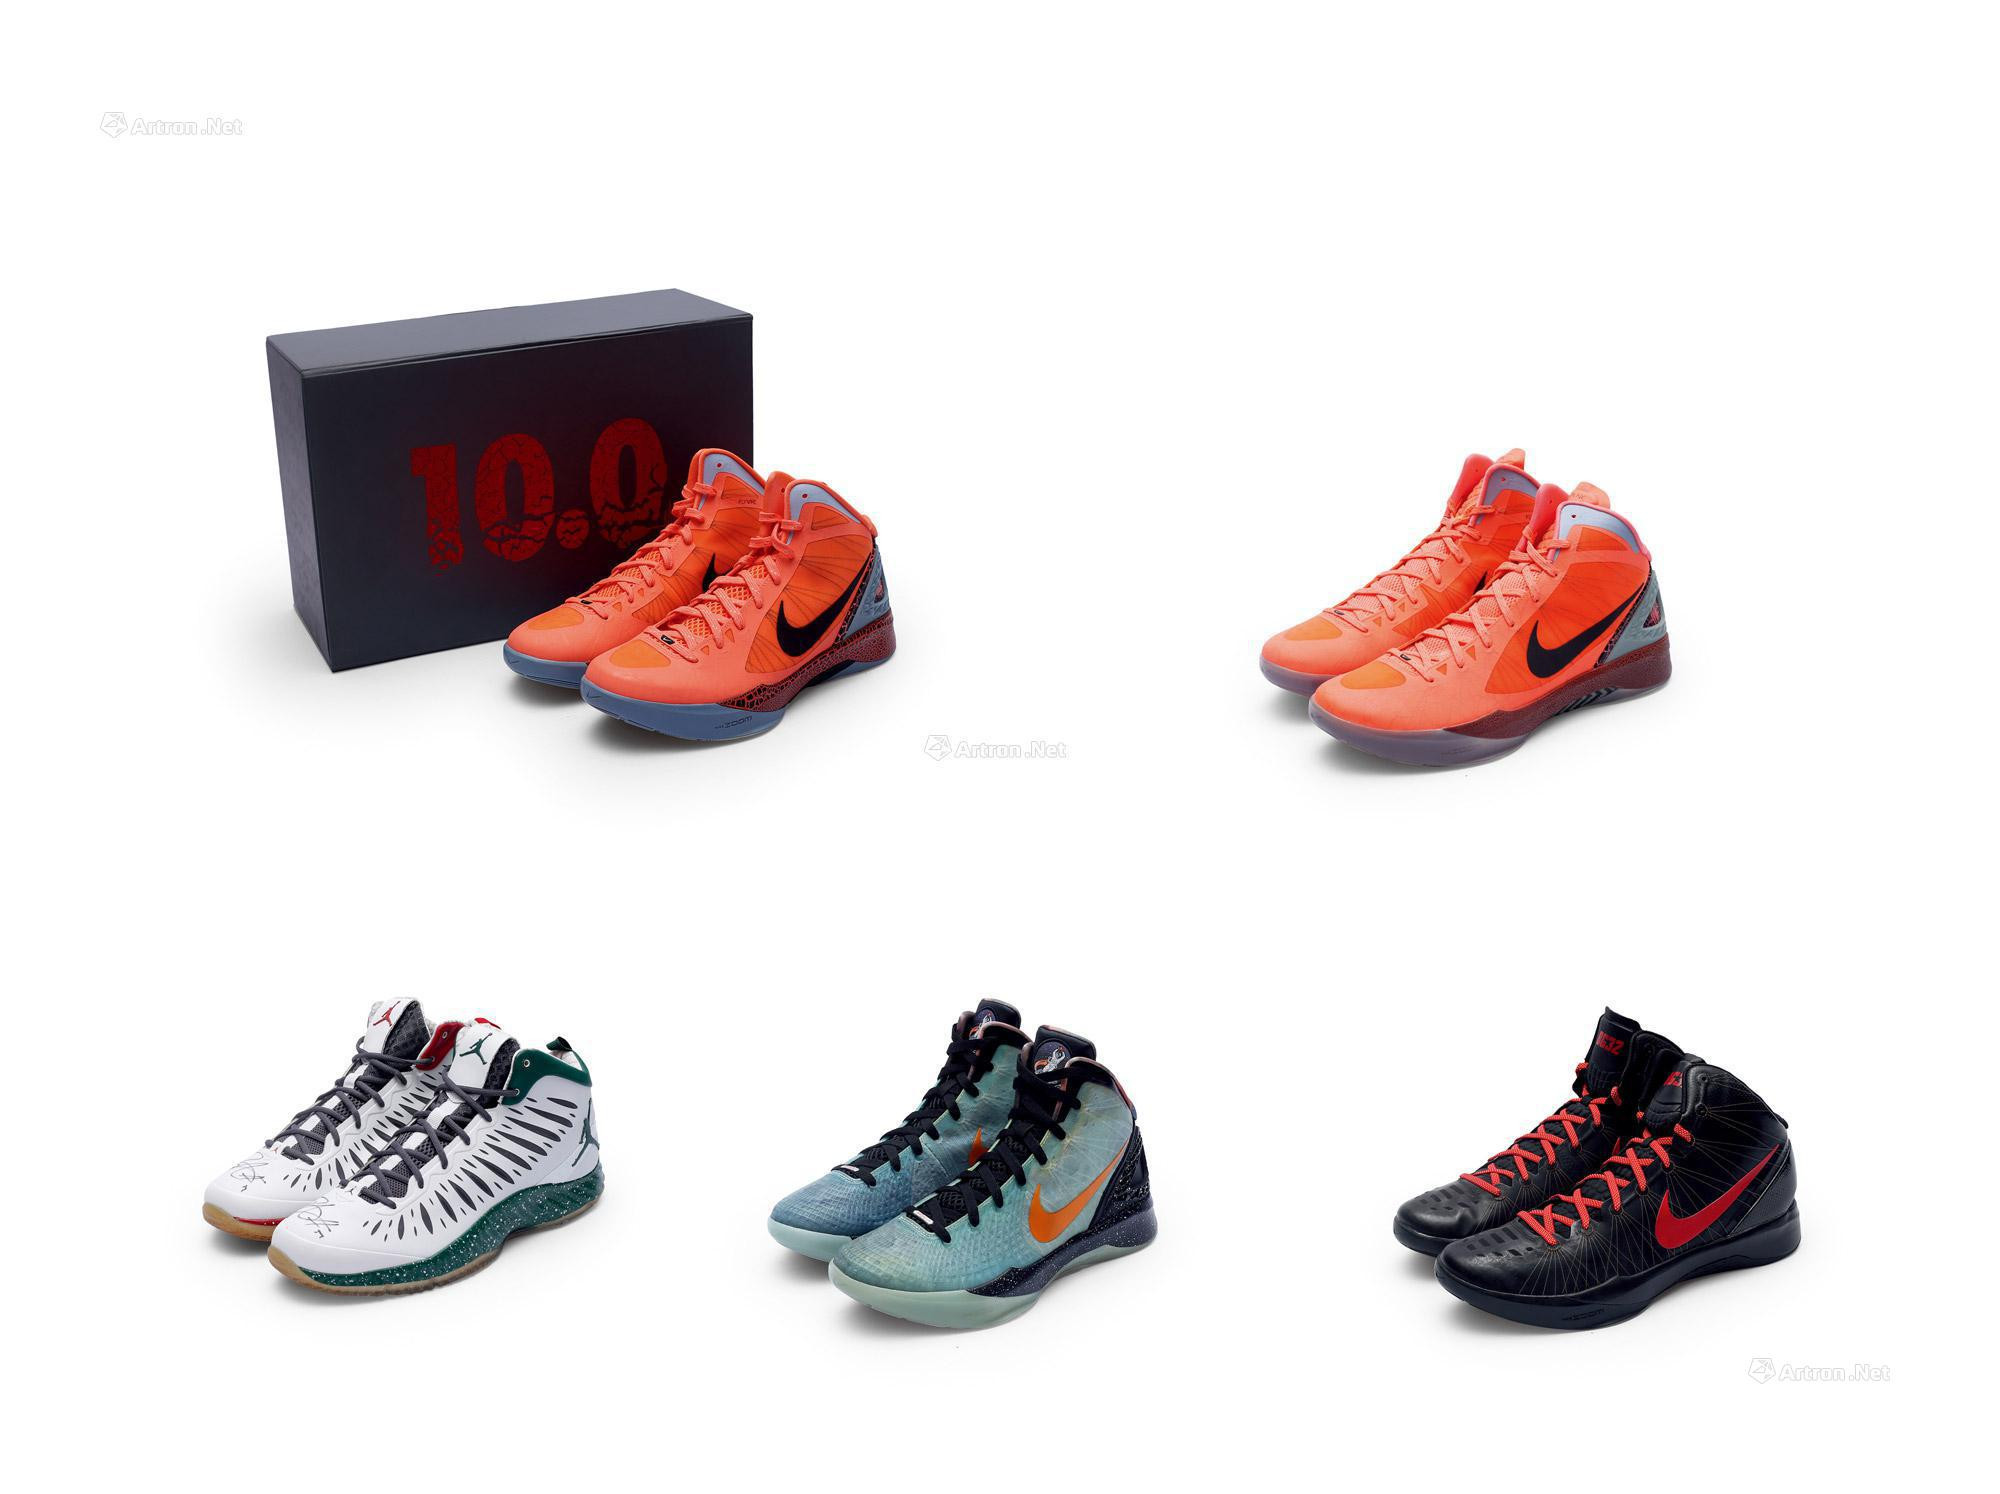 Blake Griffin Exclusive Sneaker Collection  5 Pairs of Player Exclusive Sneakers